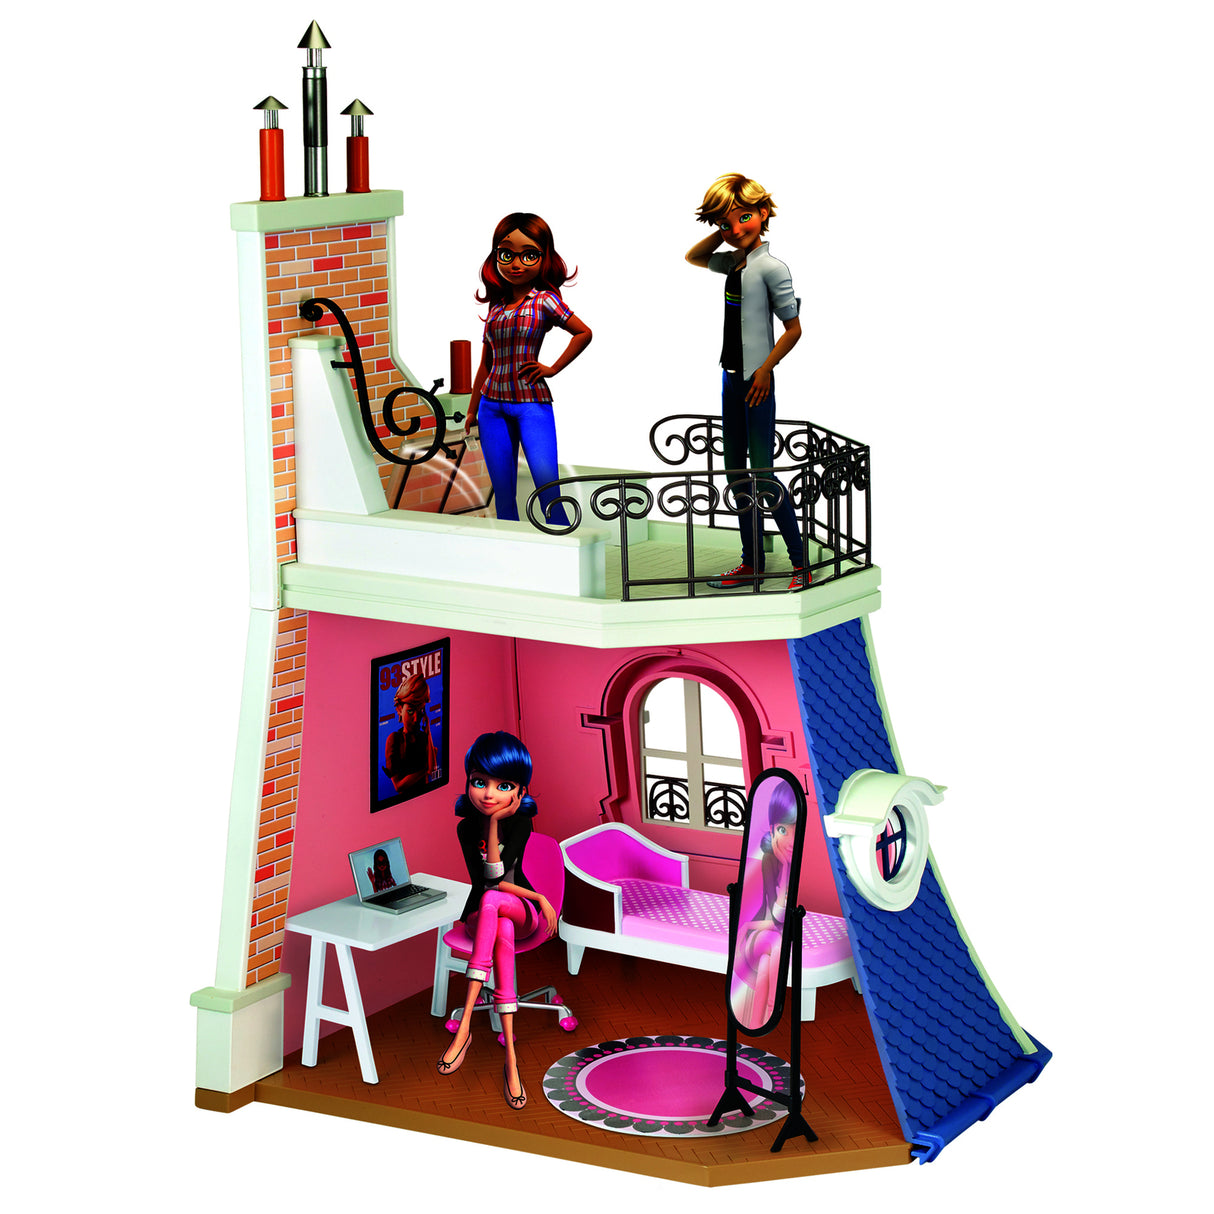 Miraculous Tales Of Ladybug And Cat Noir Marinette's 2-In-1 Bedroom & Balcony Playset